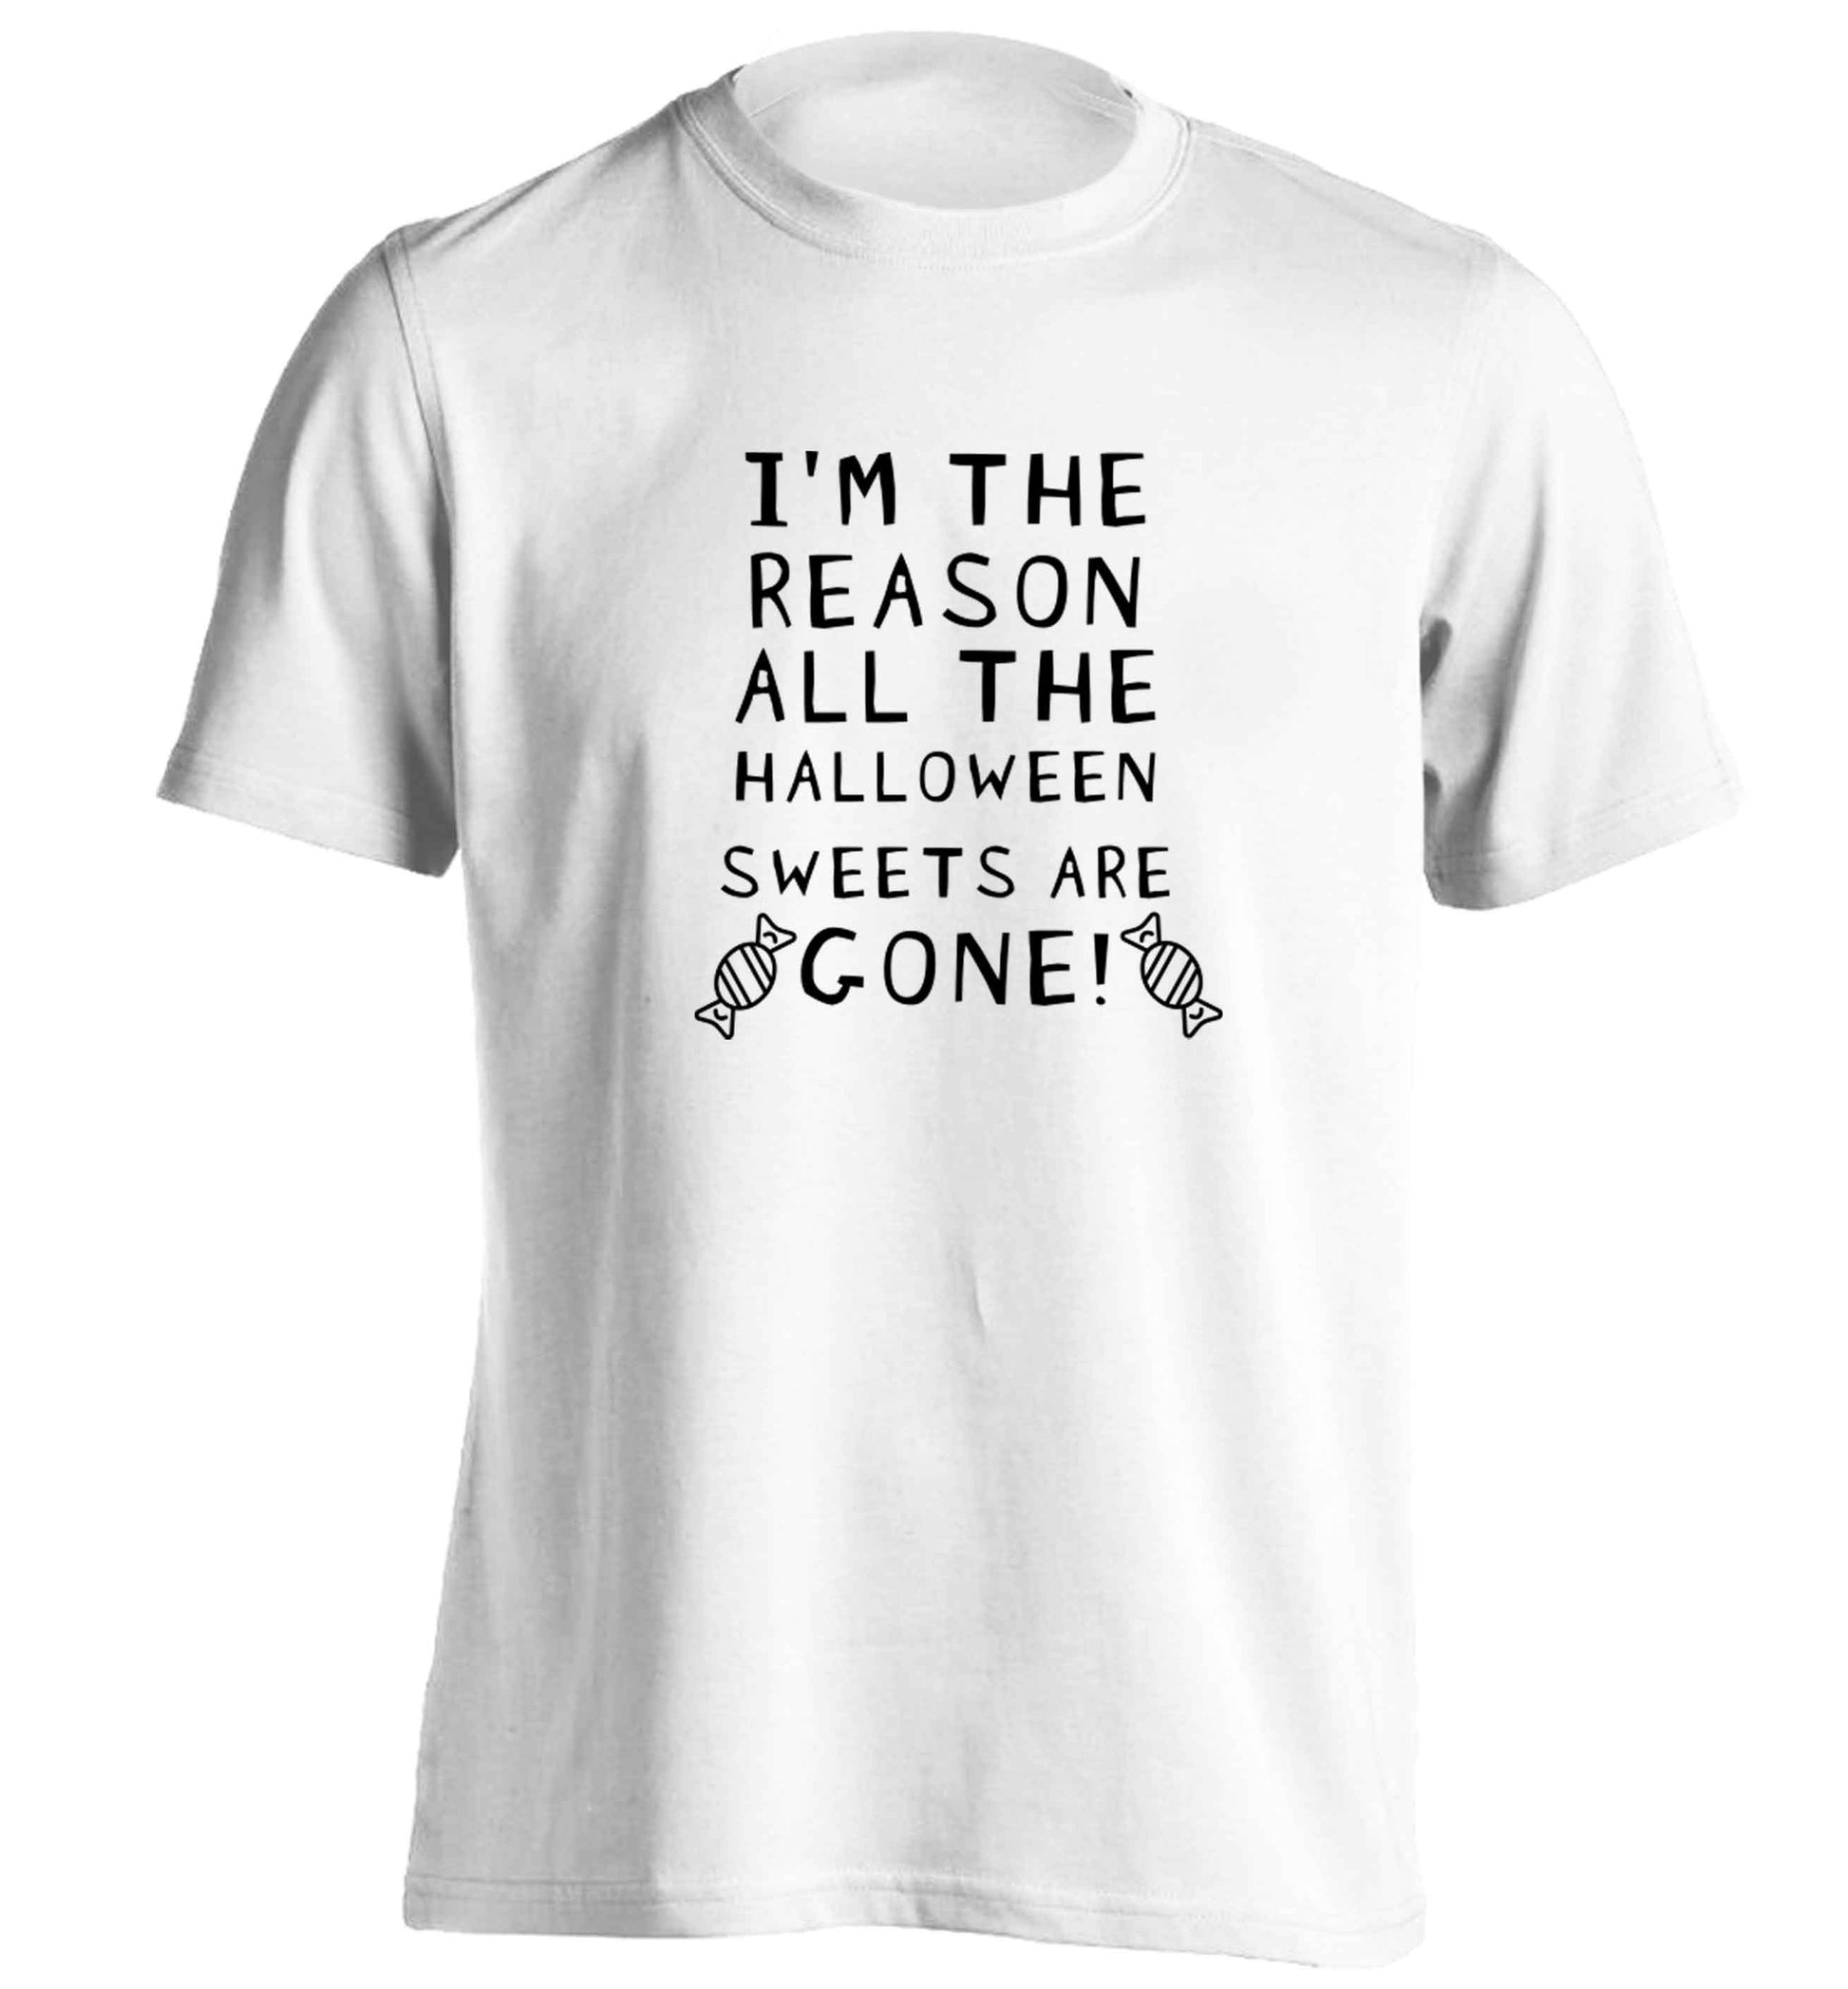 I'm the reason all of the halloween sweets are gone adults unisex white Tshirt 2XL